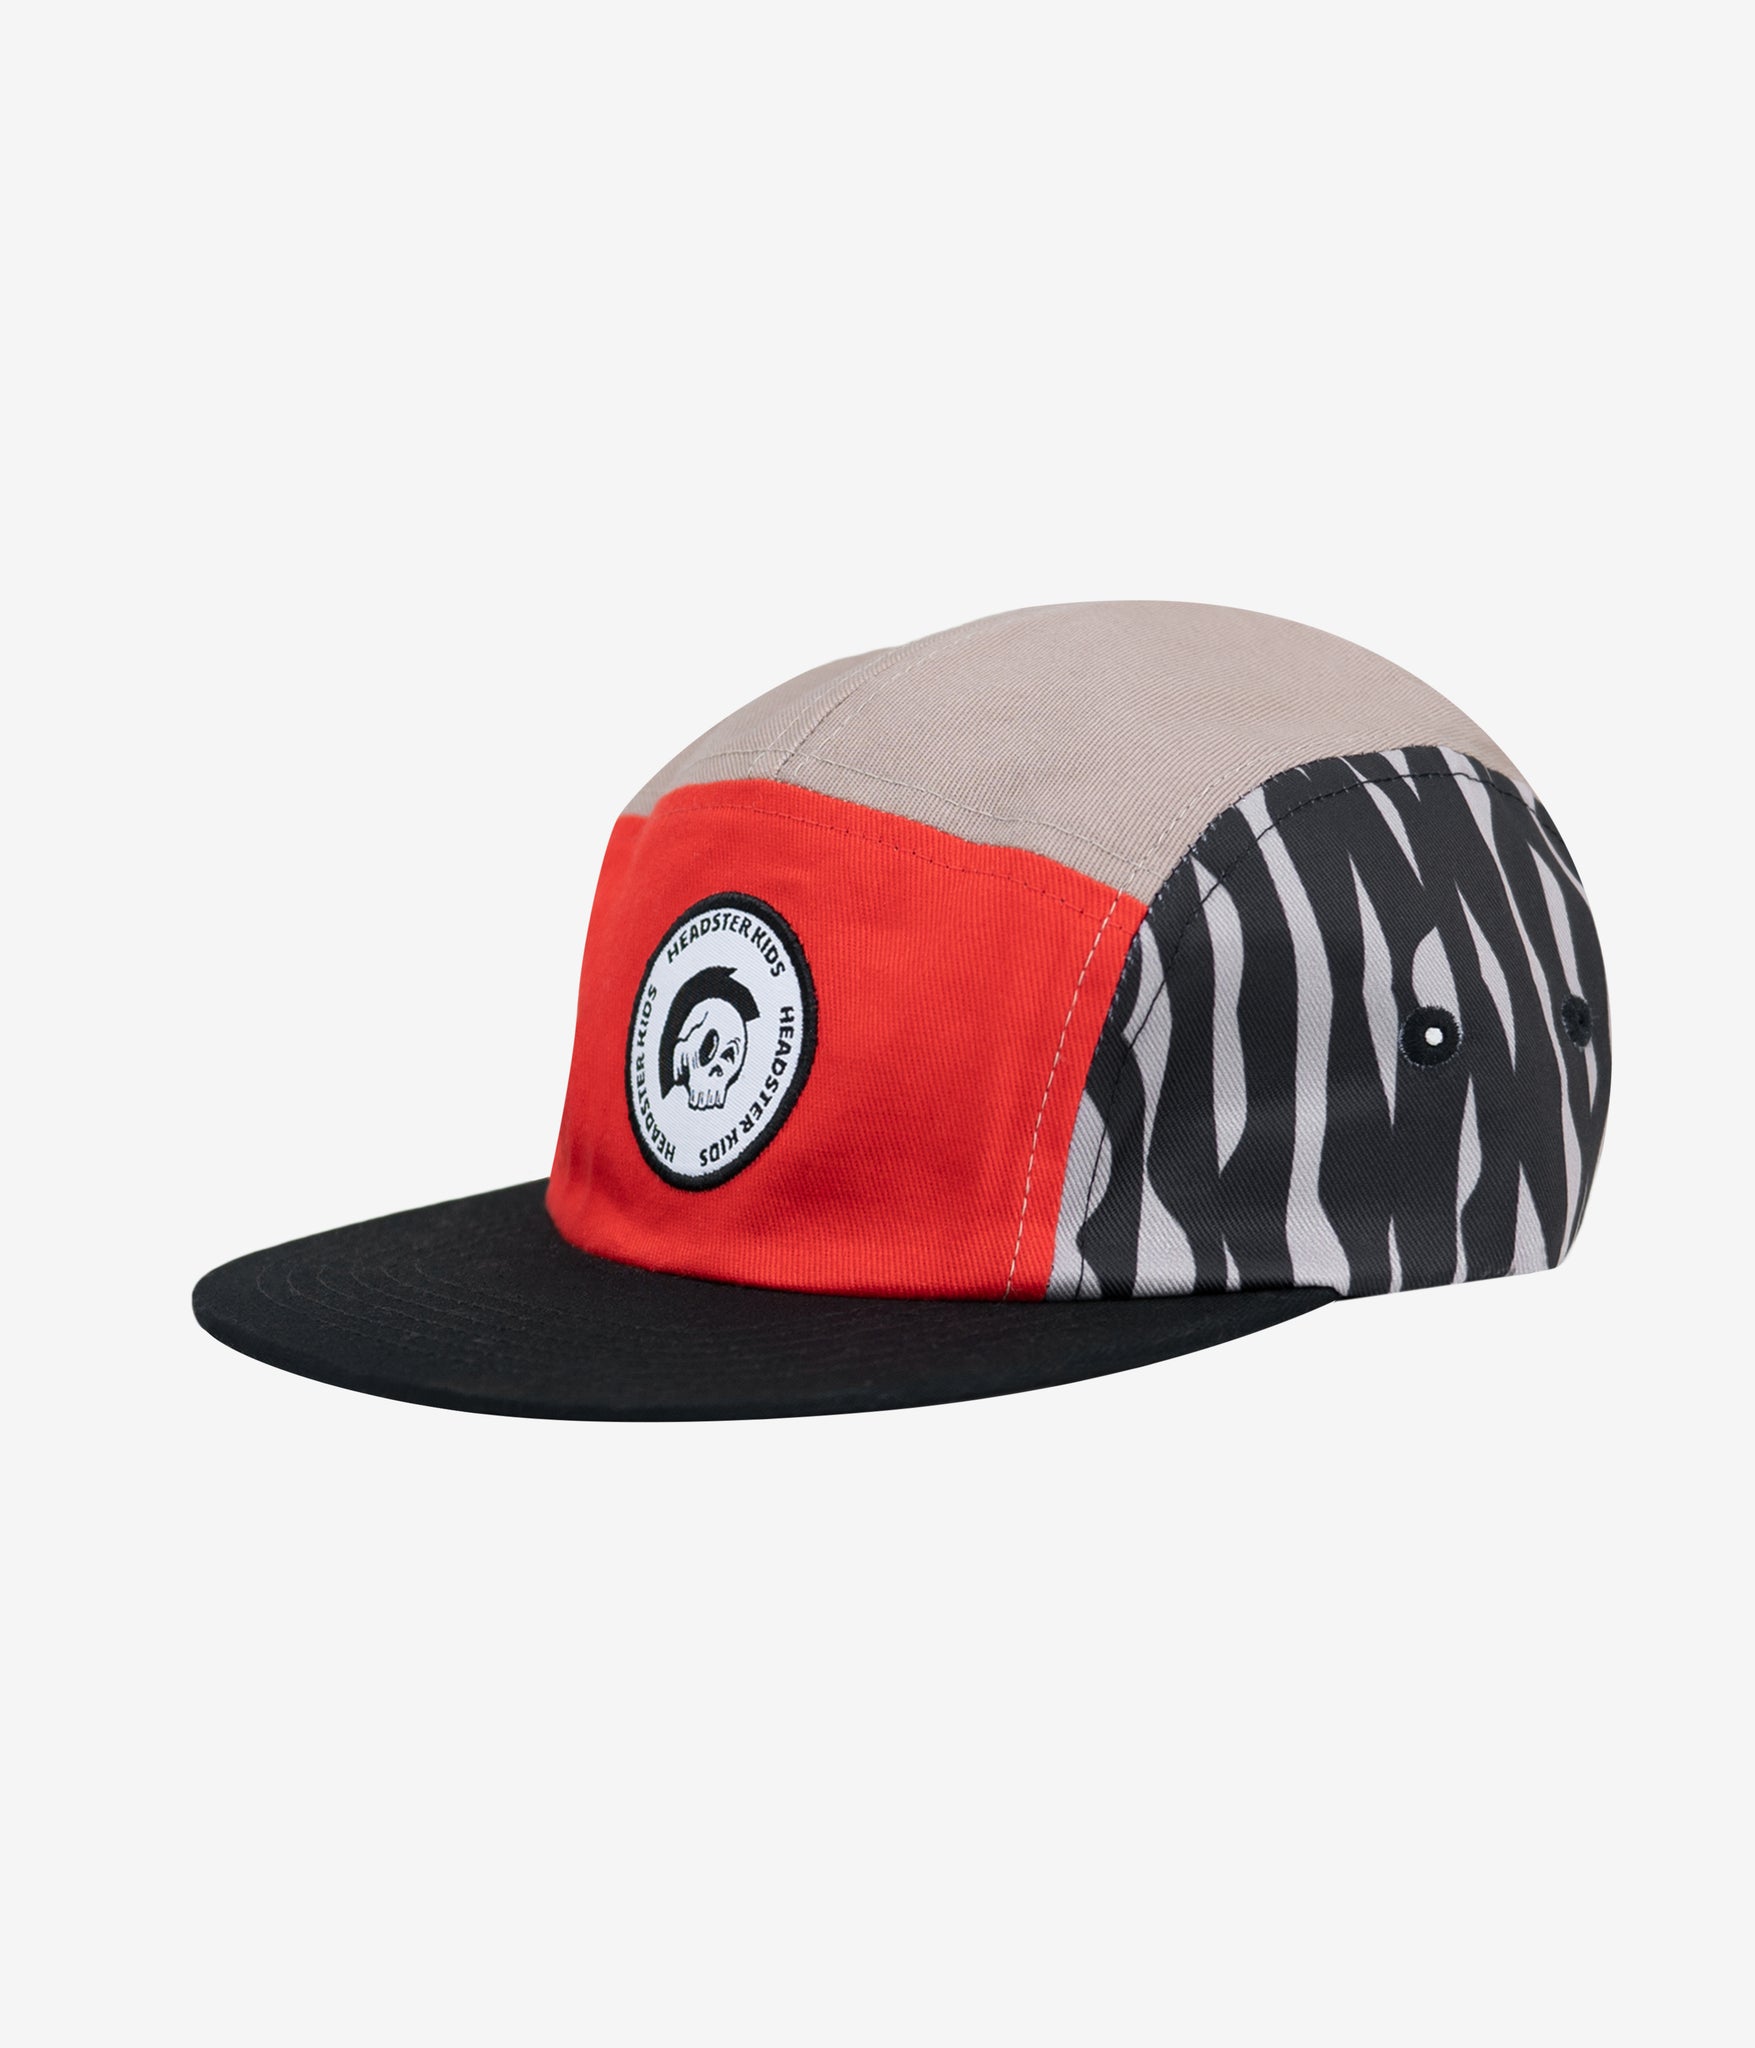 In Disguise Five Panel